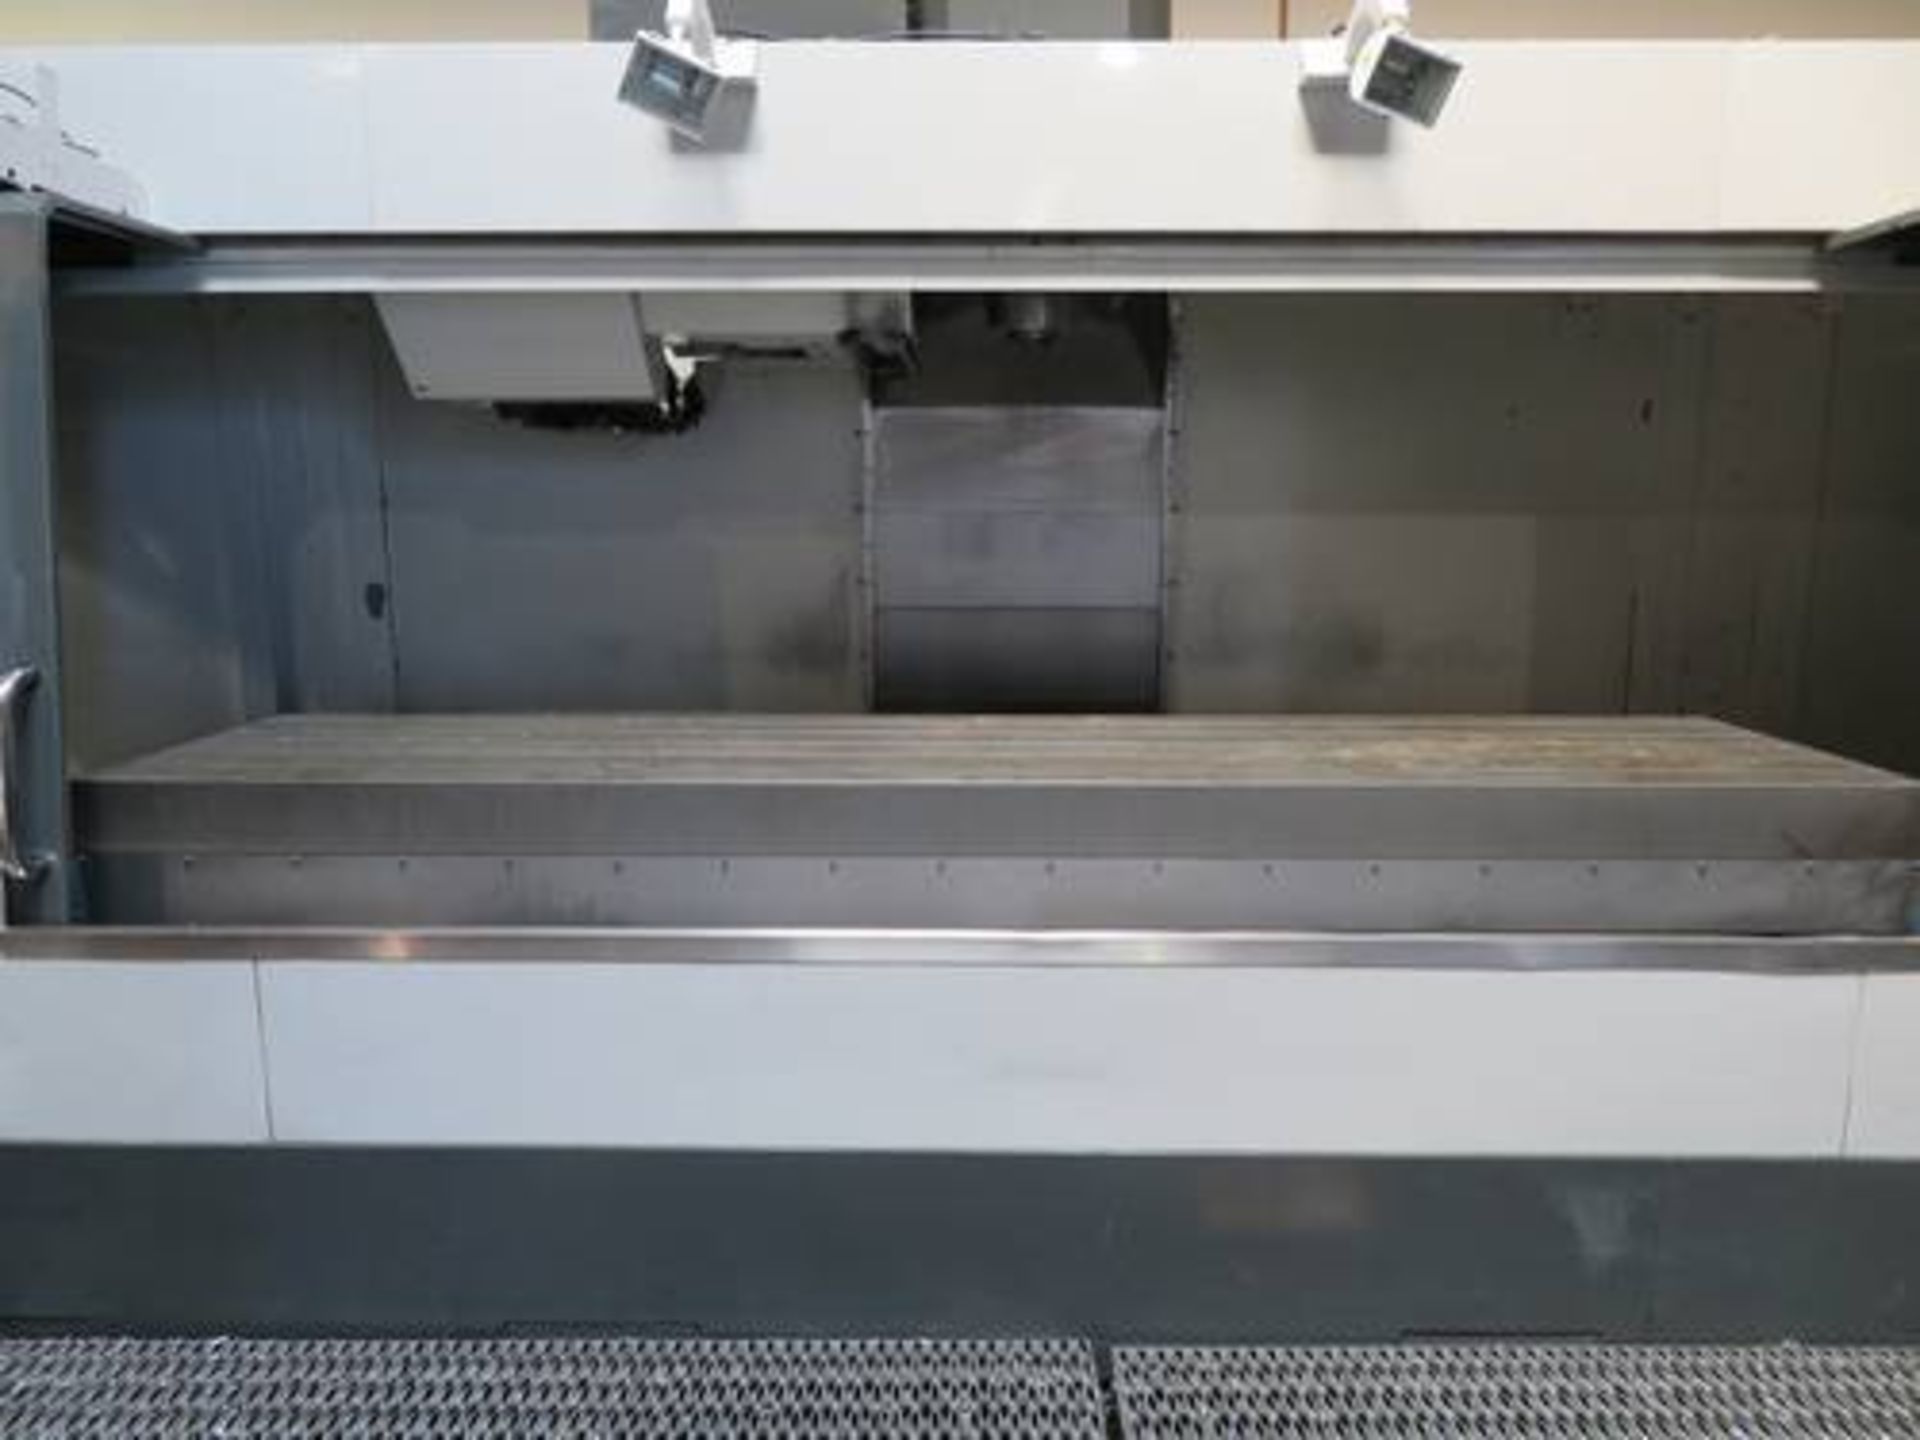 Haas VF10/50, 3-Axis V.M.C Haas Control, 120" x 32" x 30", 50 Taper, 7500 RPM Spindle, 30hp Spindle, - Image 3 of 5